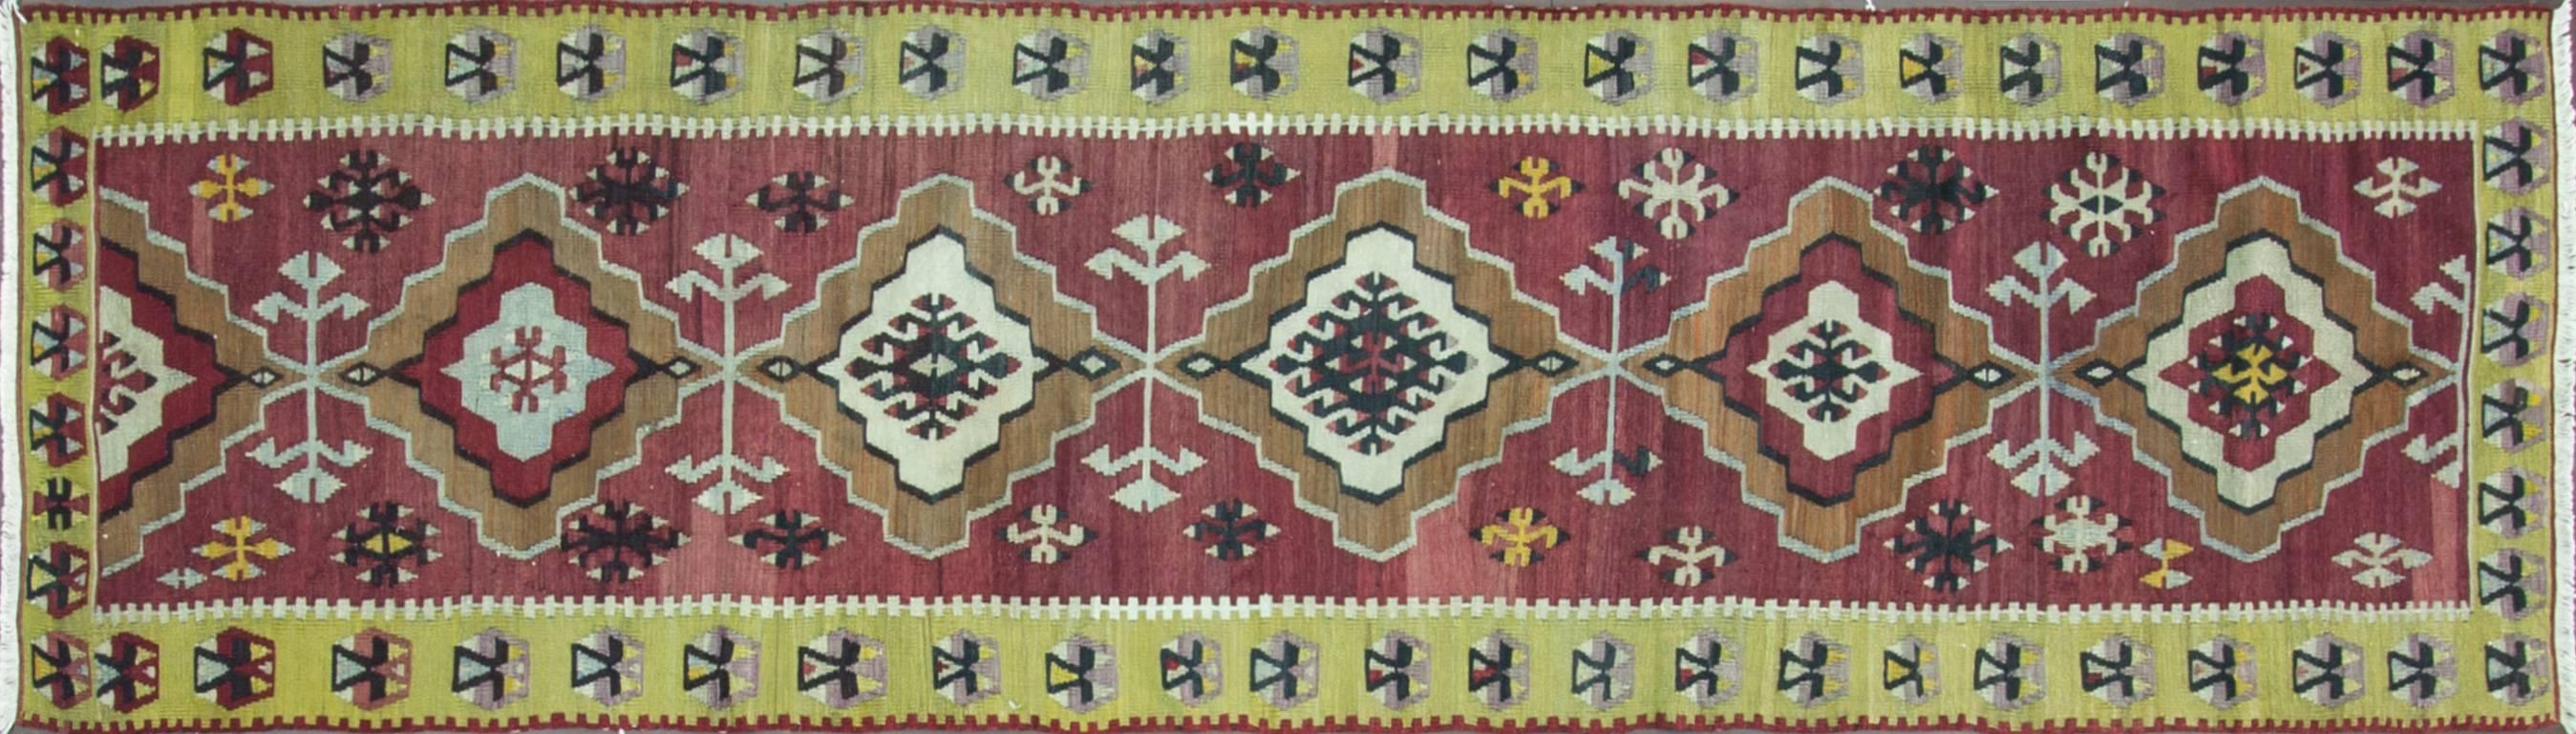 Beautiful soft color vegetable dyed wool Anatolian Kilim.
Like pile carpets, Kilim have been produced since ancient times.
Kilims are produced by tightly interweaving the warp and weft strands of the weave to produce a flat surface with no pile.